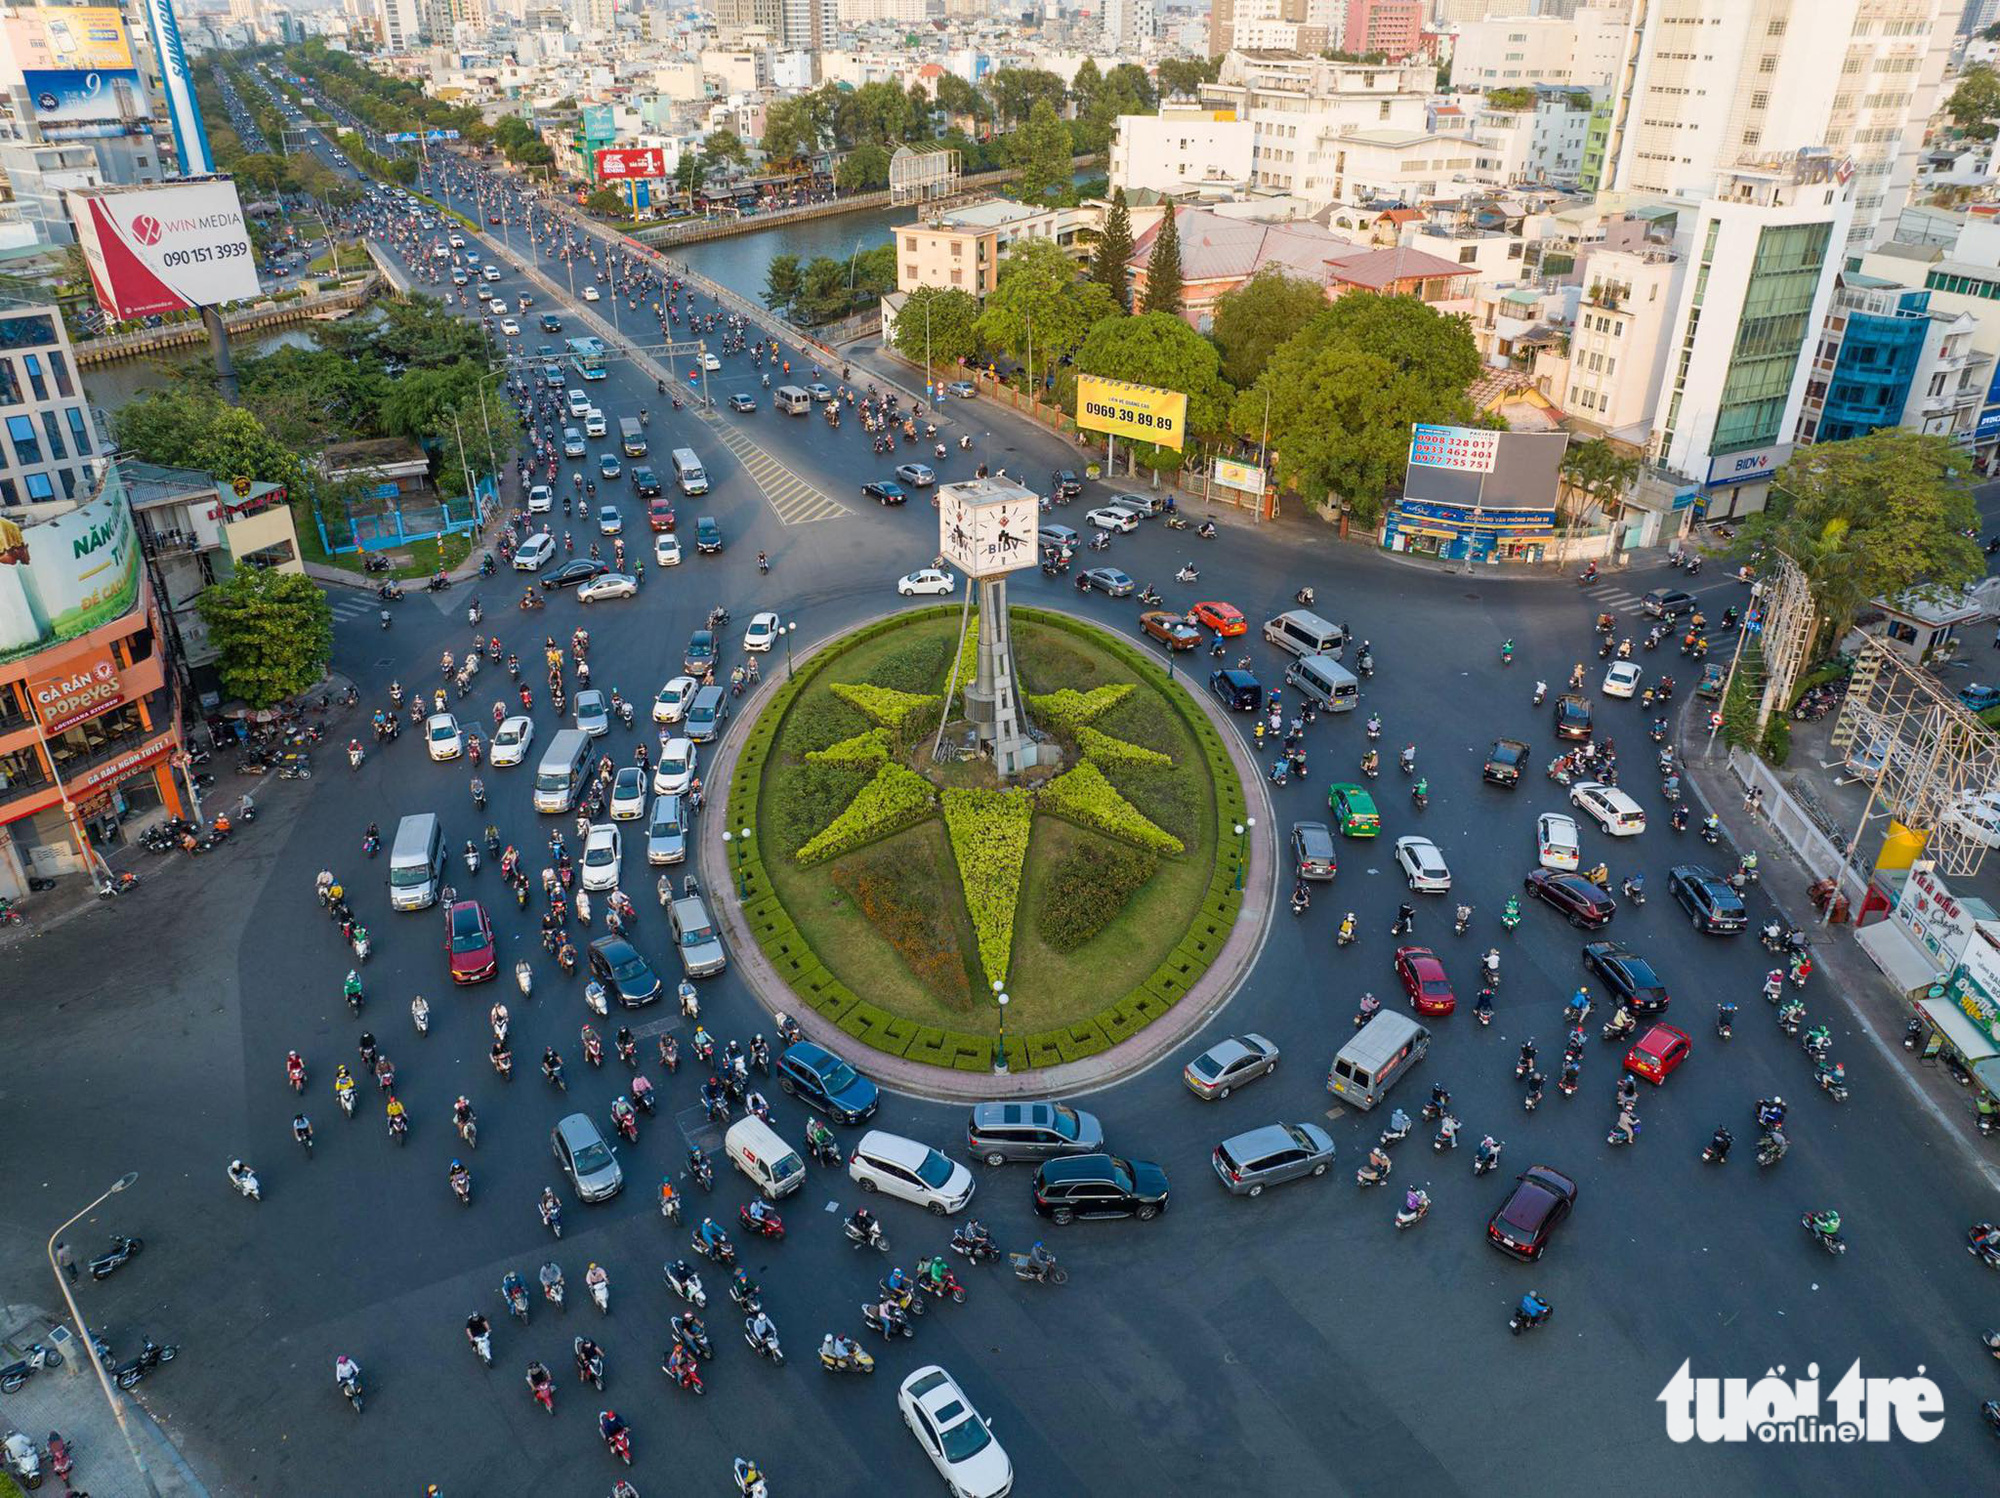 The roundabout is an intersection of Dien Bien Phu, Nguyen Binh Khiem, and Hoang Sa streets with a complicated traffic situation. Over the past few years, the roundabout has witnessed heavy traffic jams during peak hours.